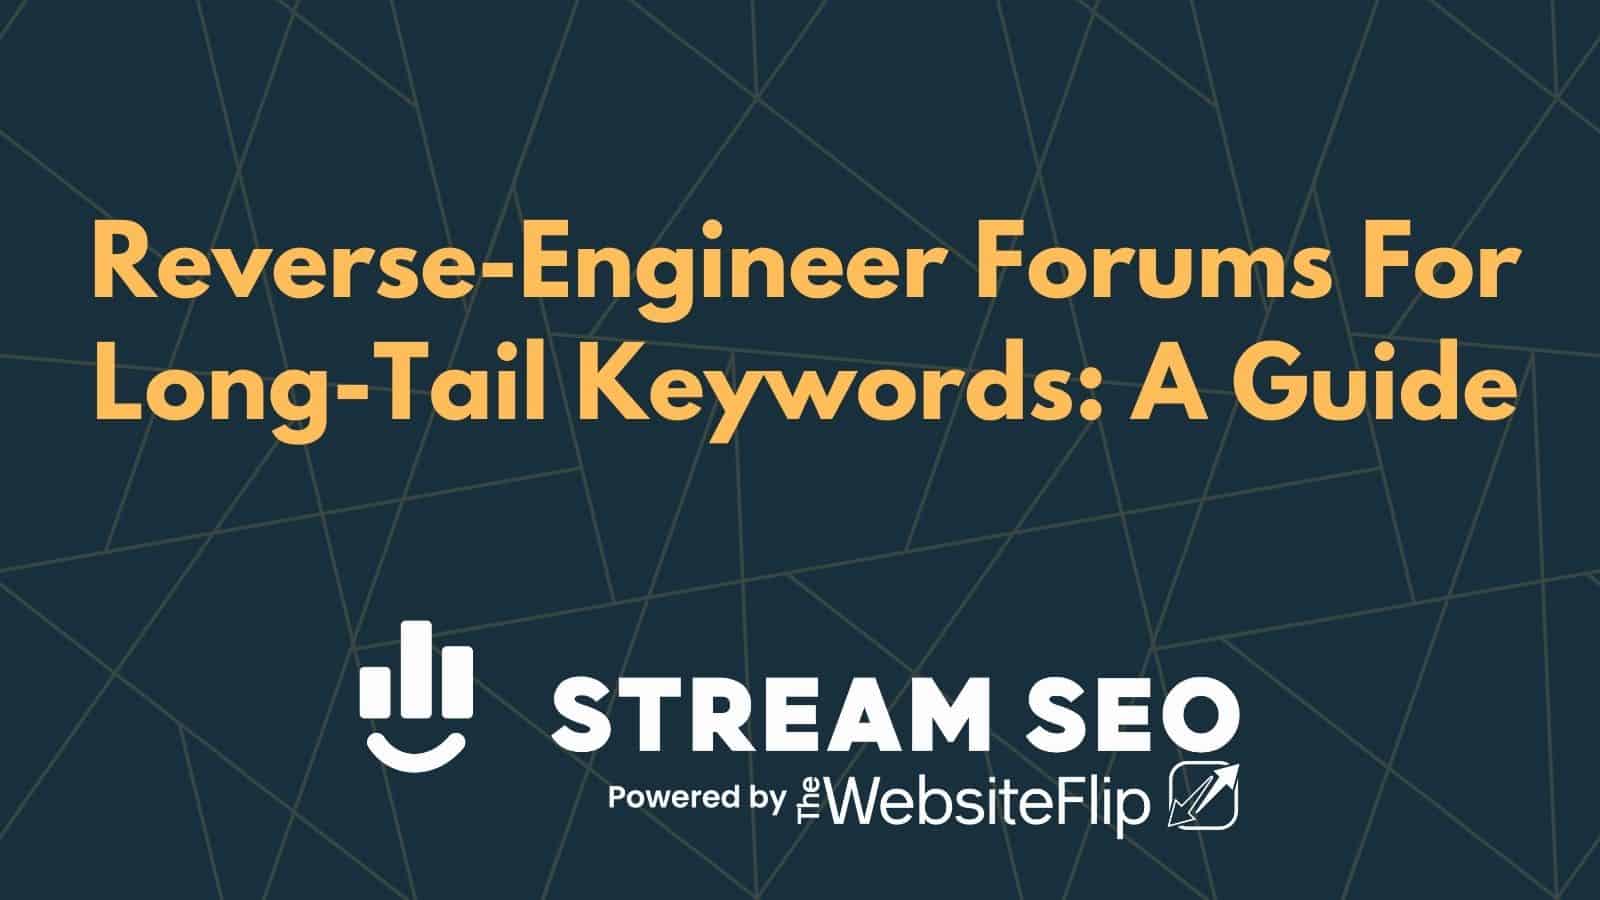 Mining Forums for Long-Tail Keywords: How To Guide